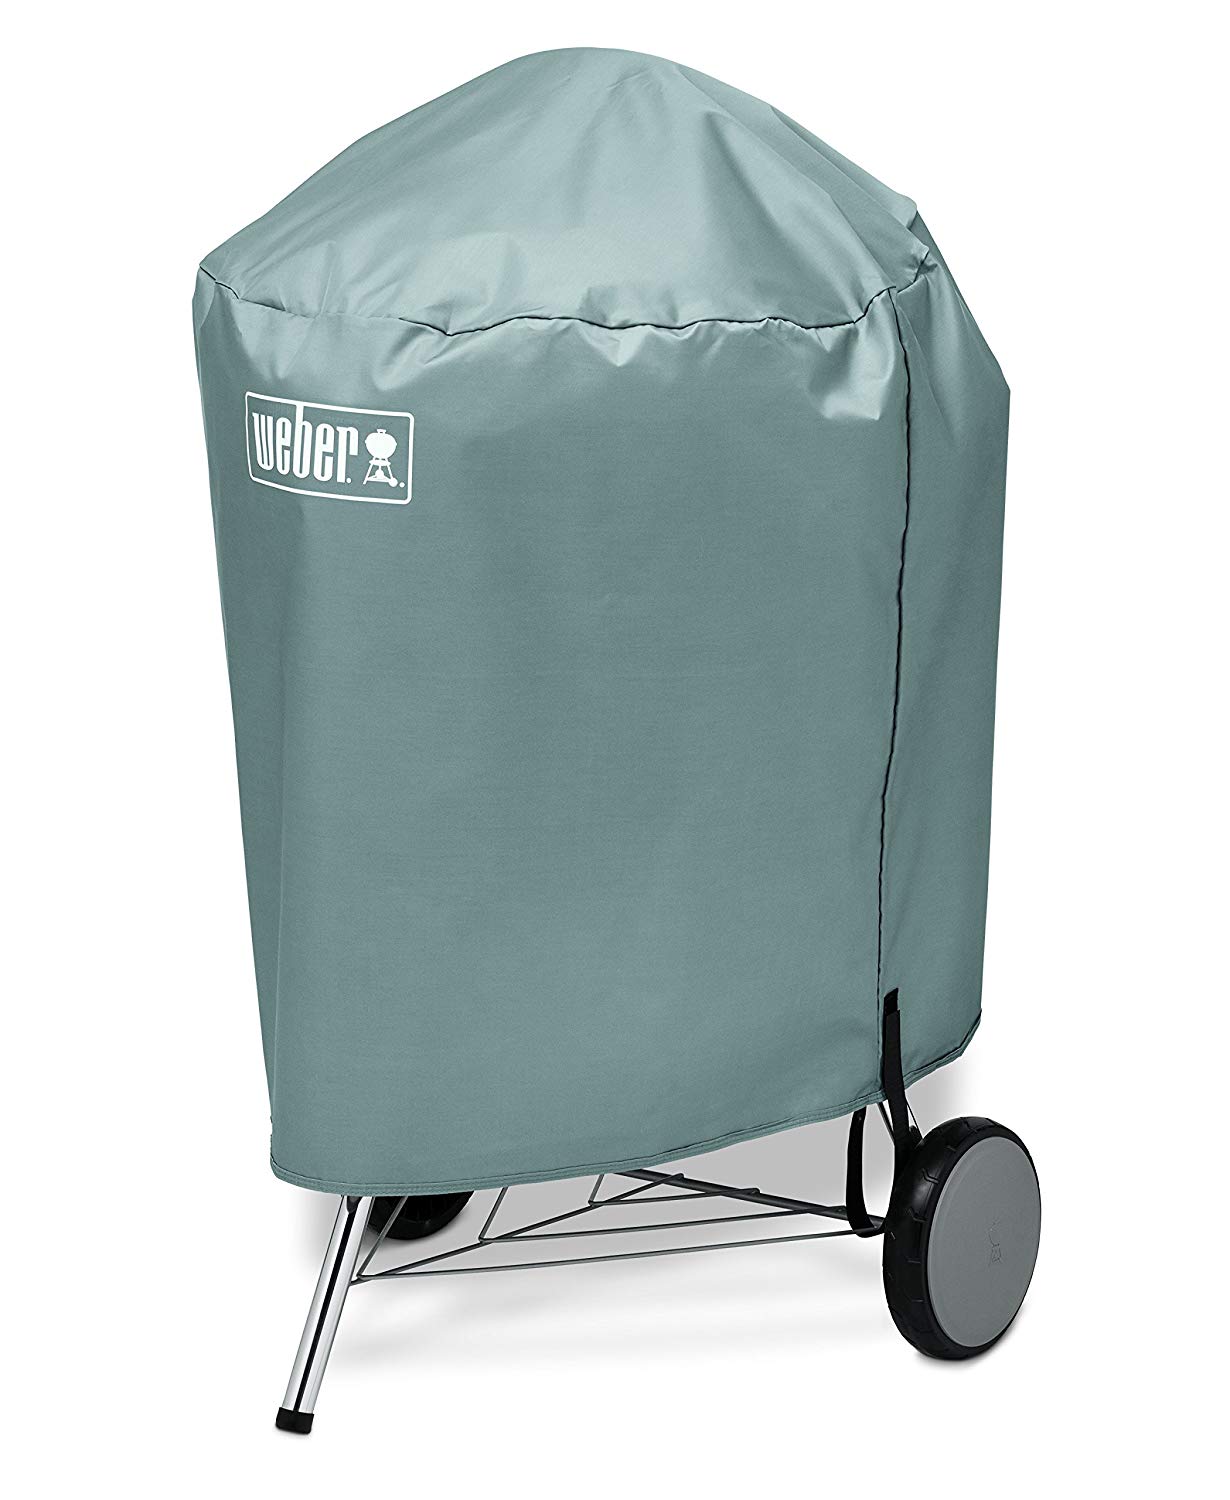 Weber 7176 Charcoal Kettle Grill Cover